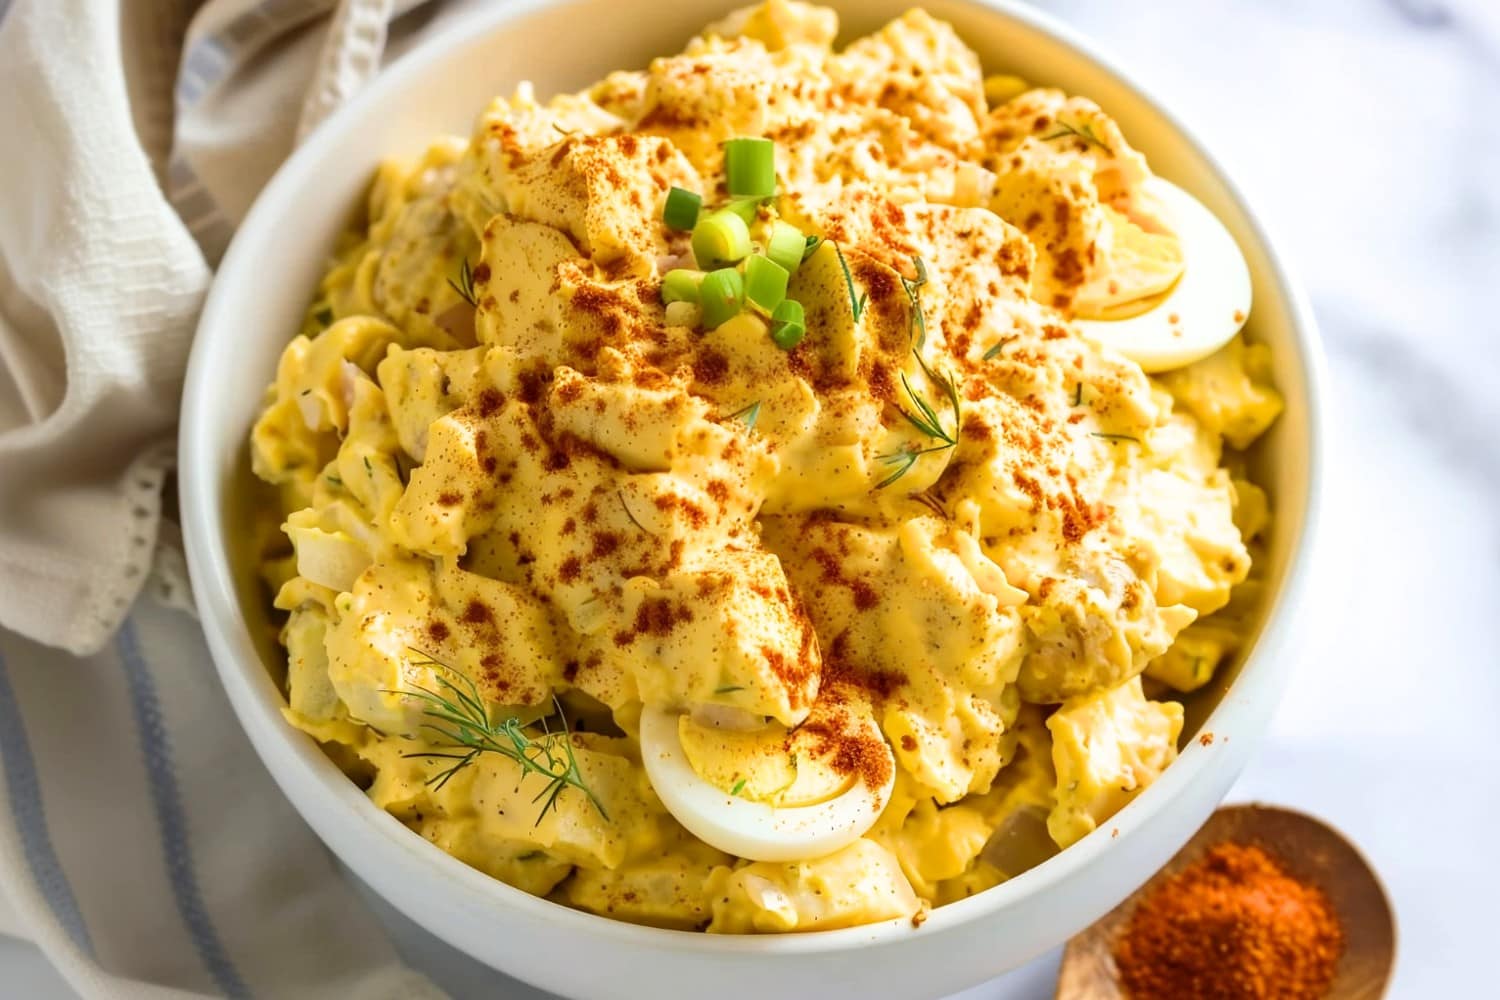 Mouthwatering deviled egg-inspired potato salad, garnished with dill and paprika for an extra pop of flavor